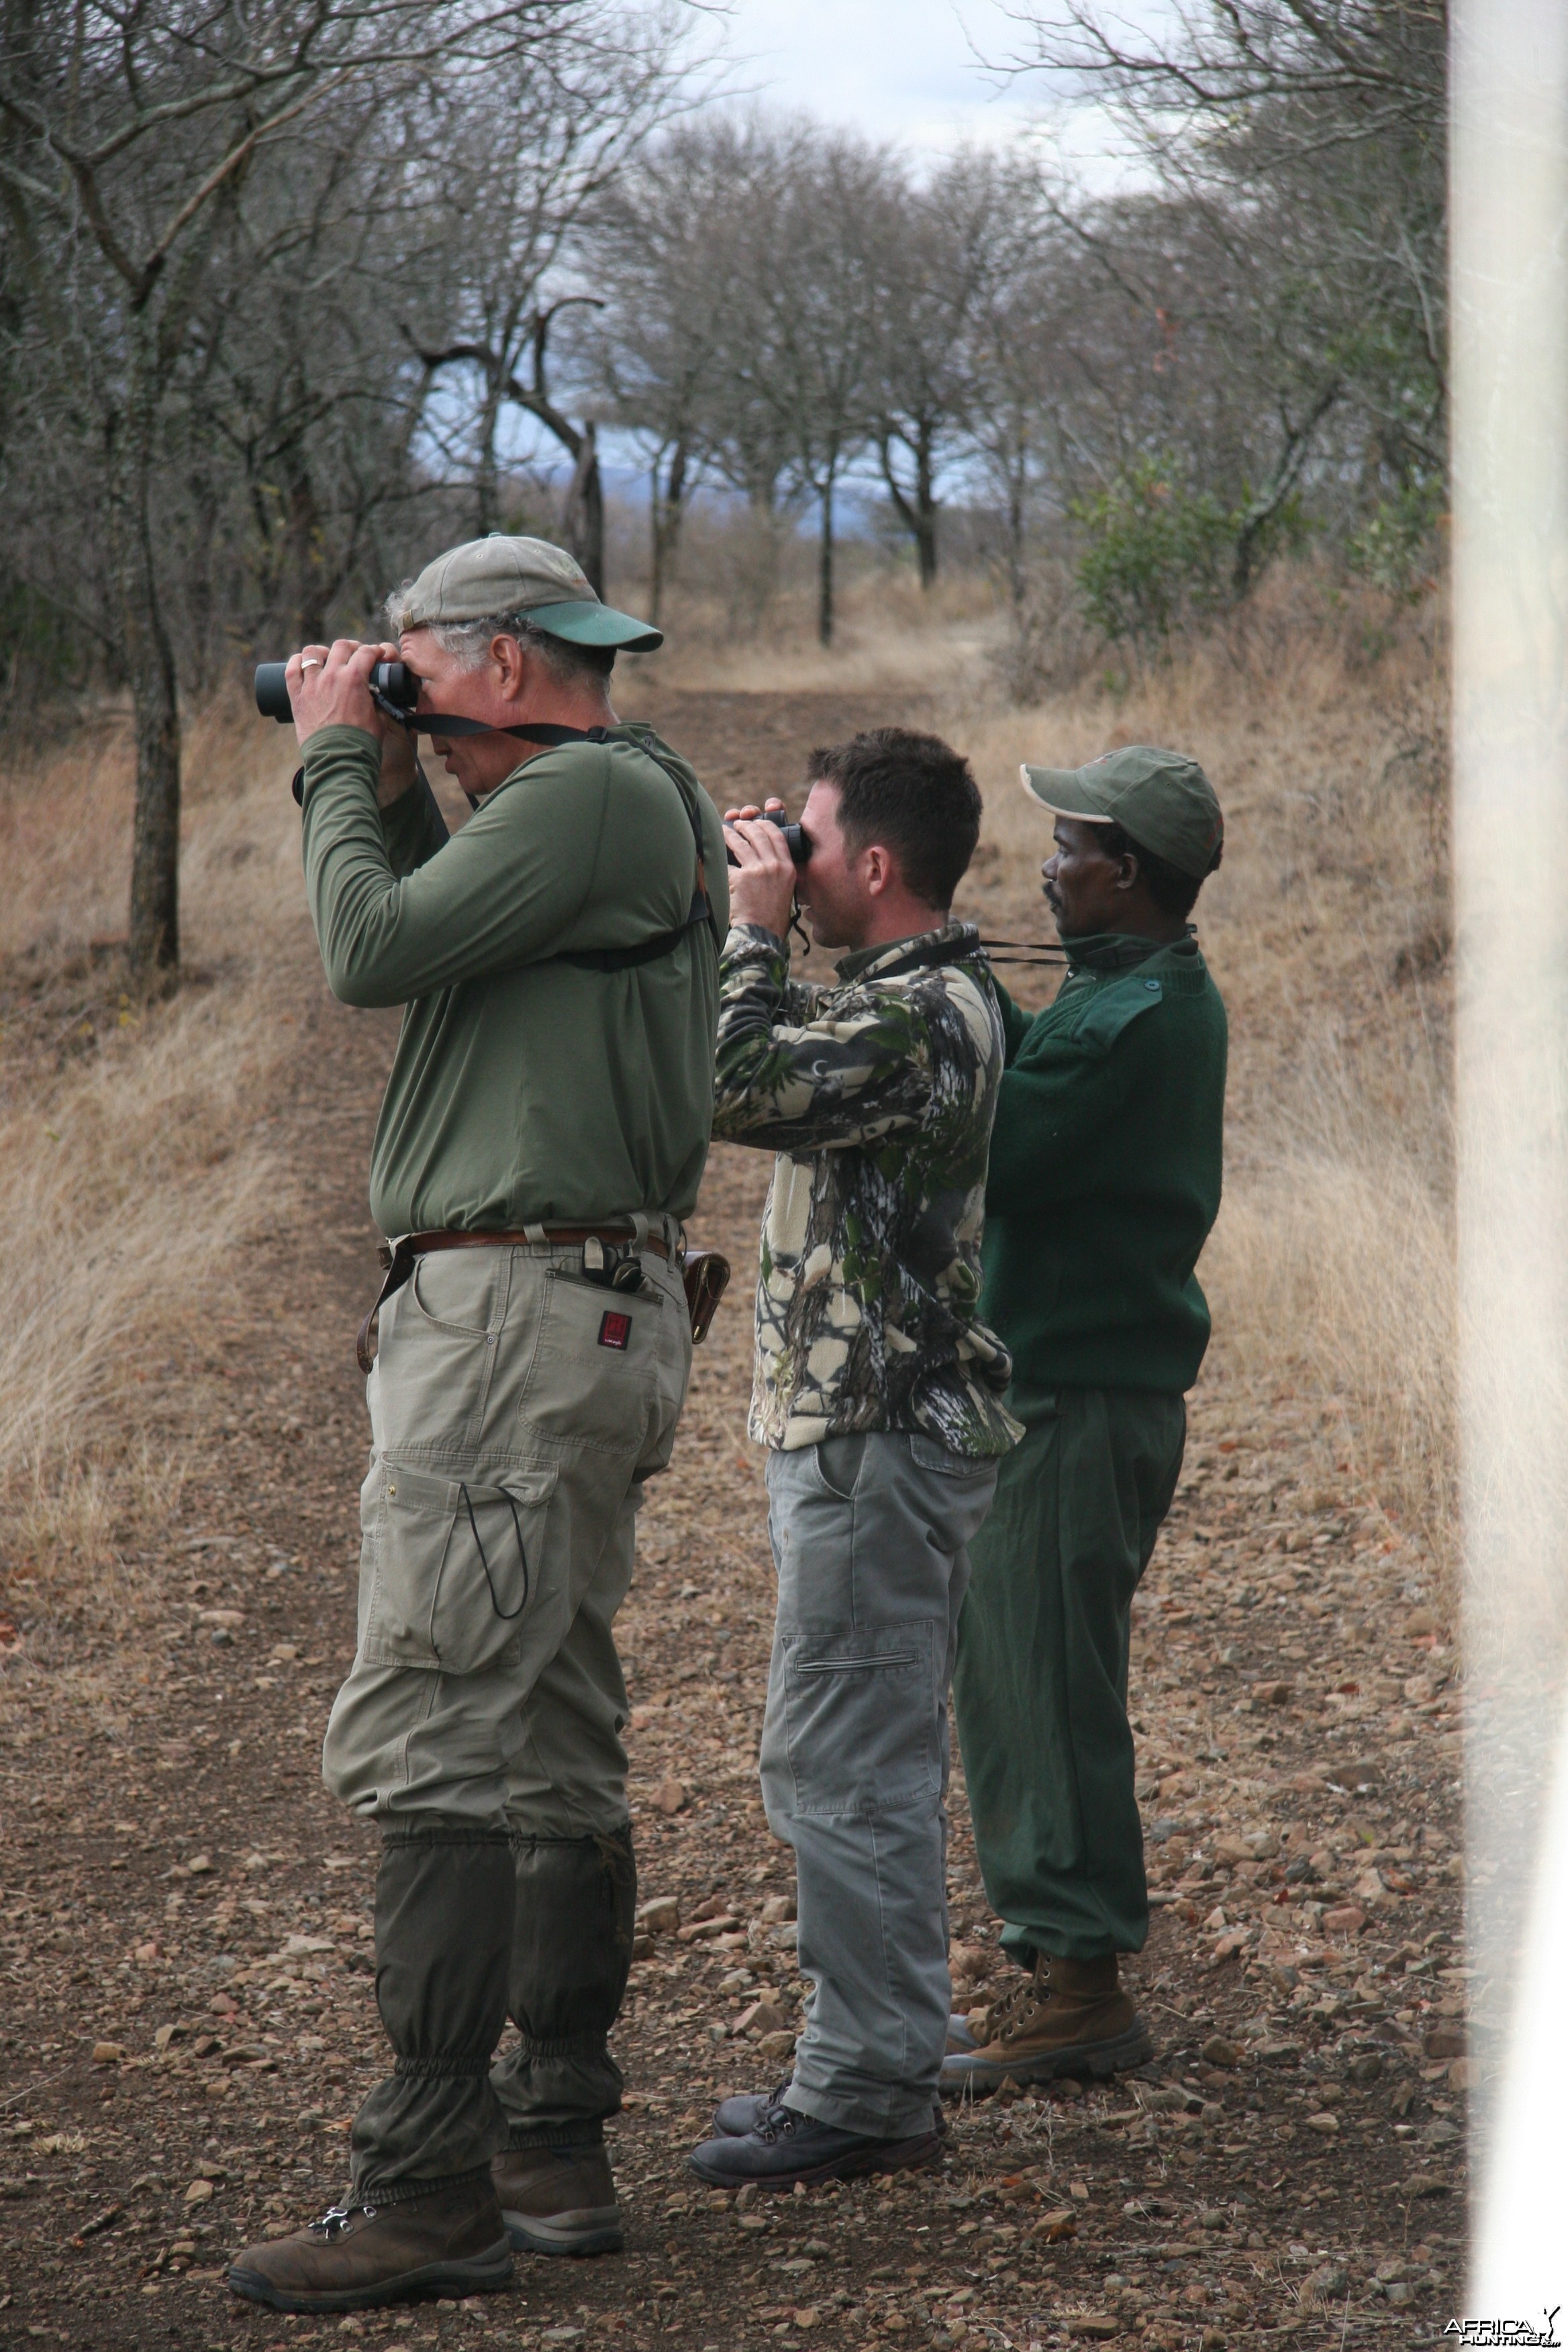 Glassing for Kudu - the team